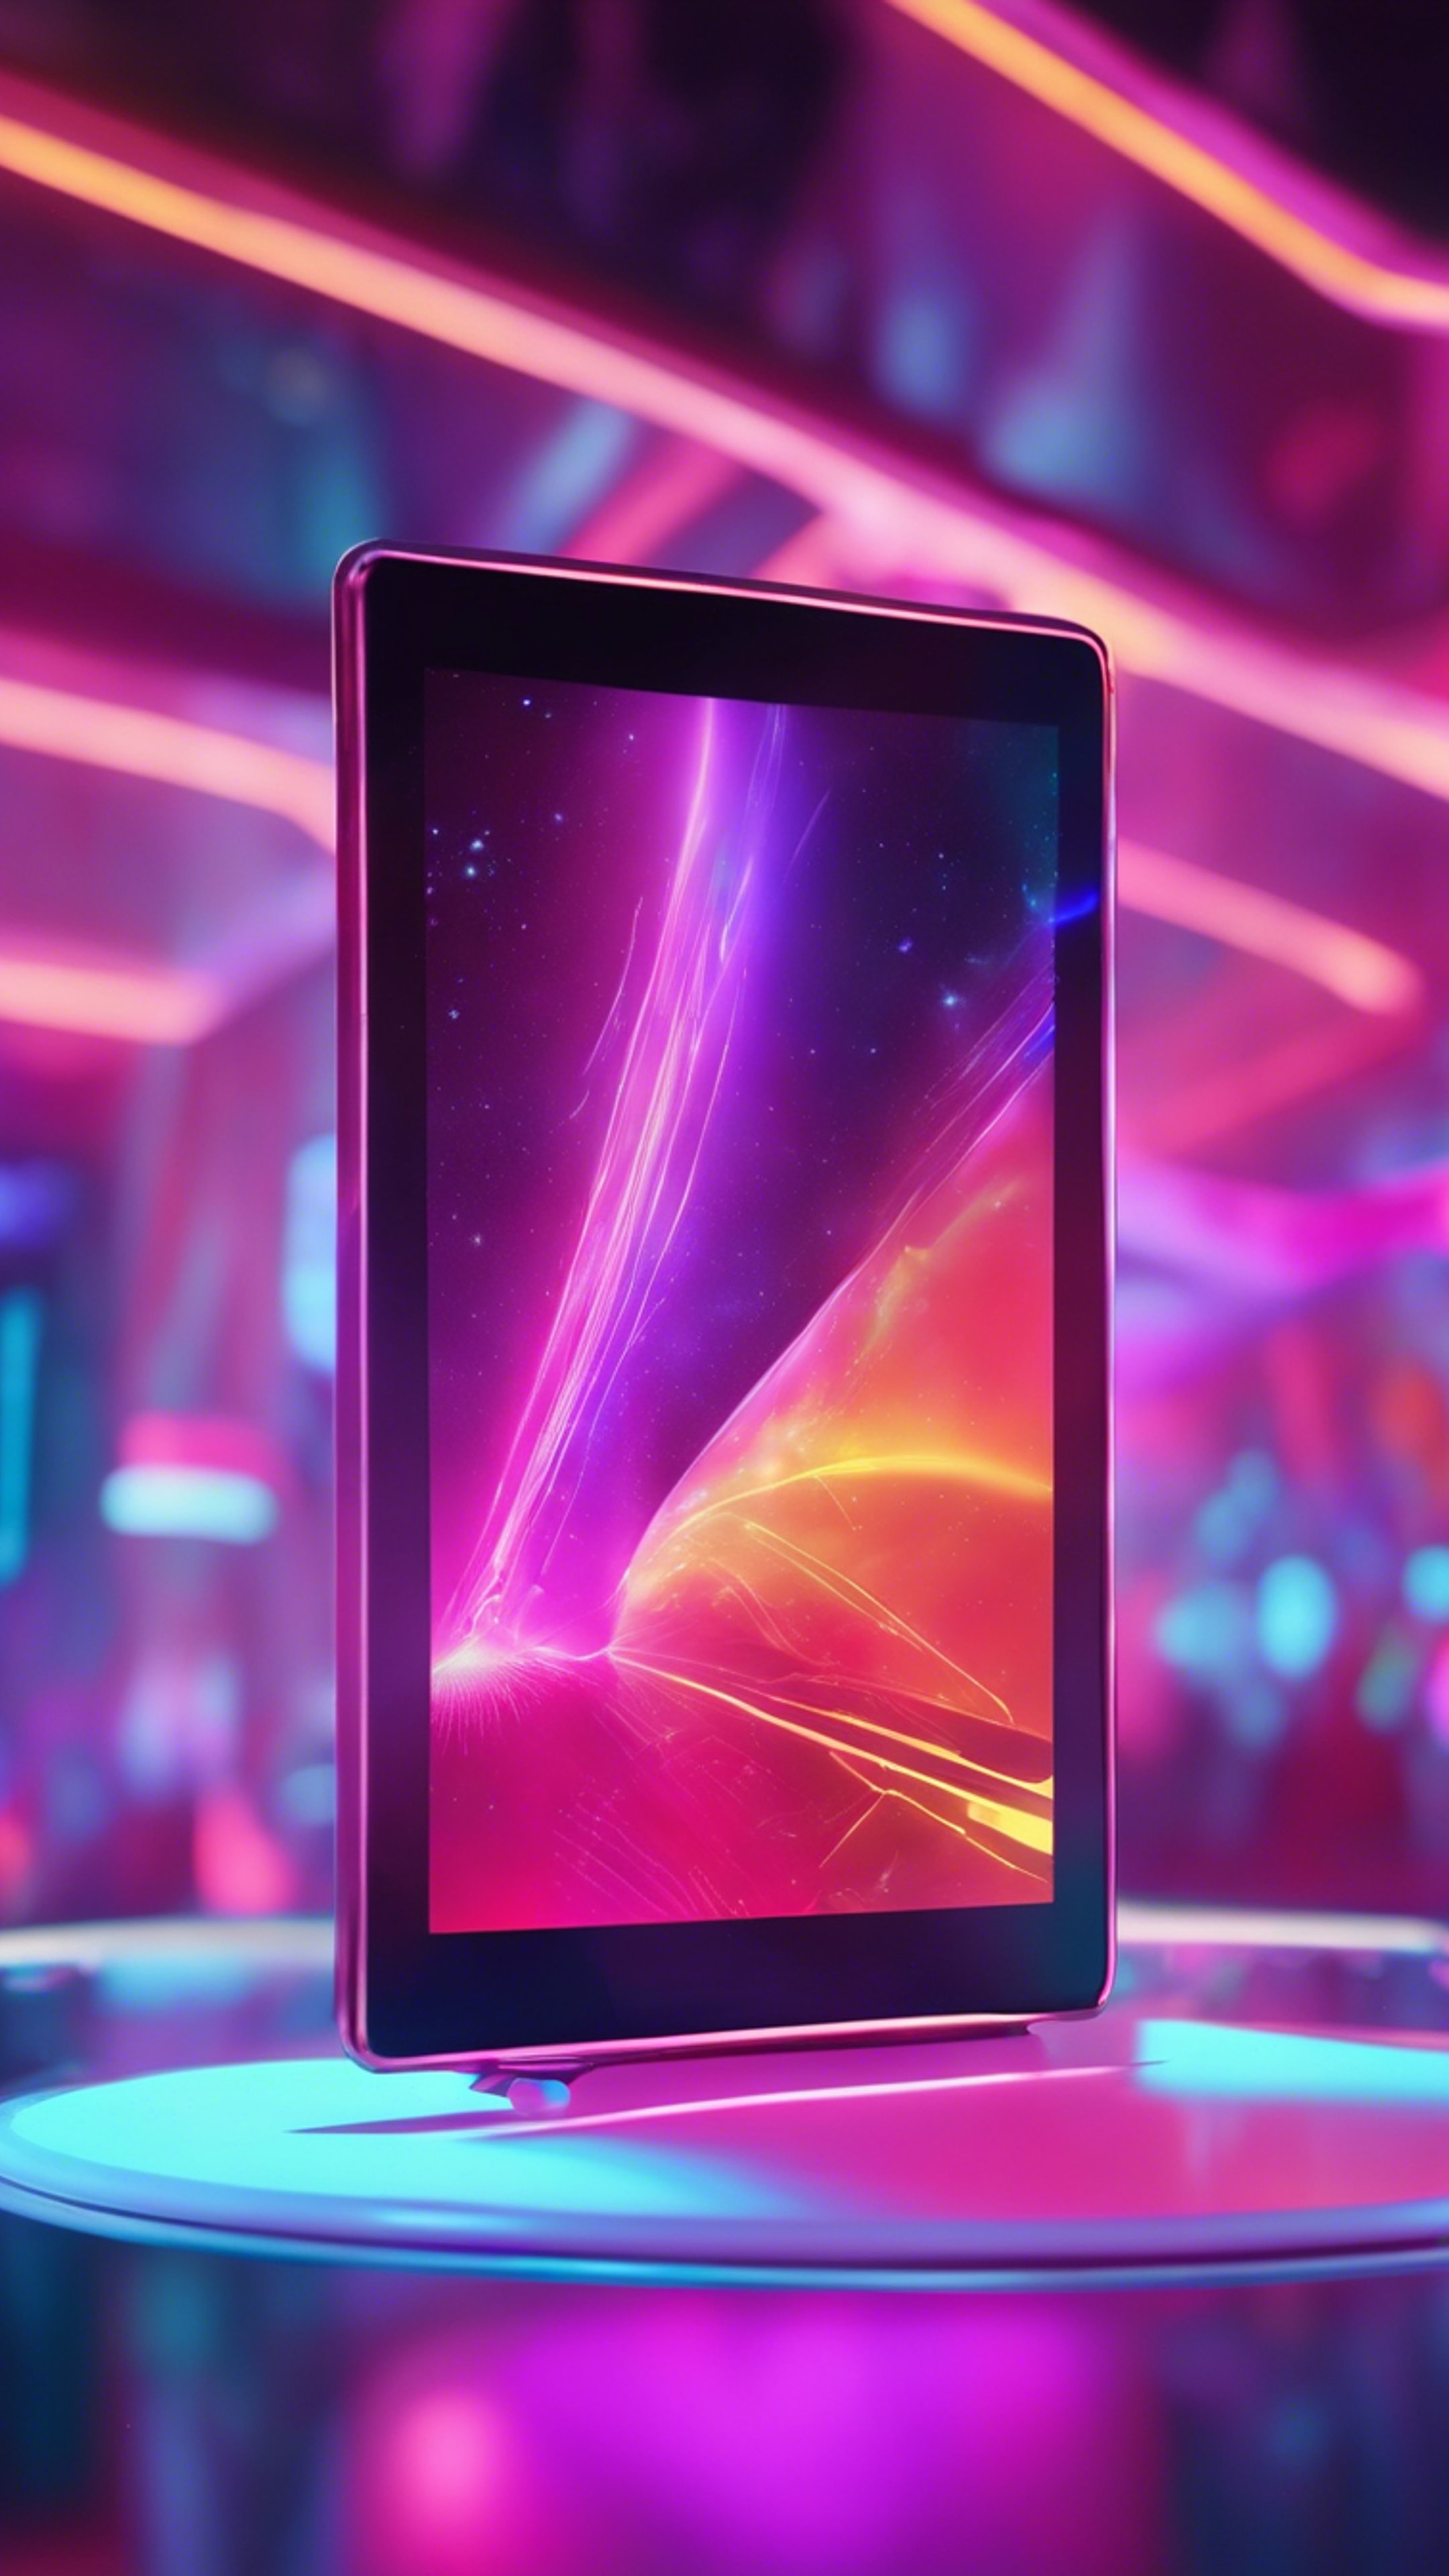 An ultra-modern tablet with a holographic touch screen floating in a futuristic, vividly colored neon environment.壁紙[25bfd648fdfb4eaf80d5]